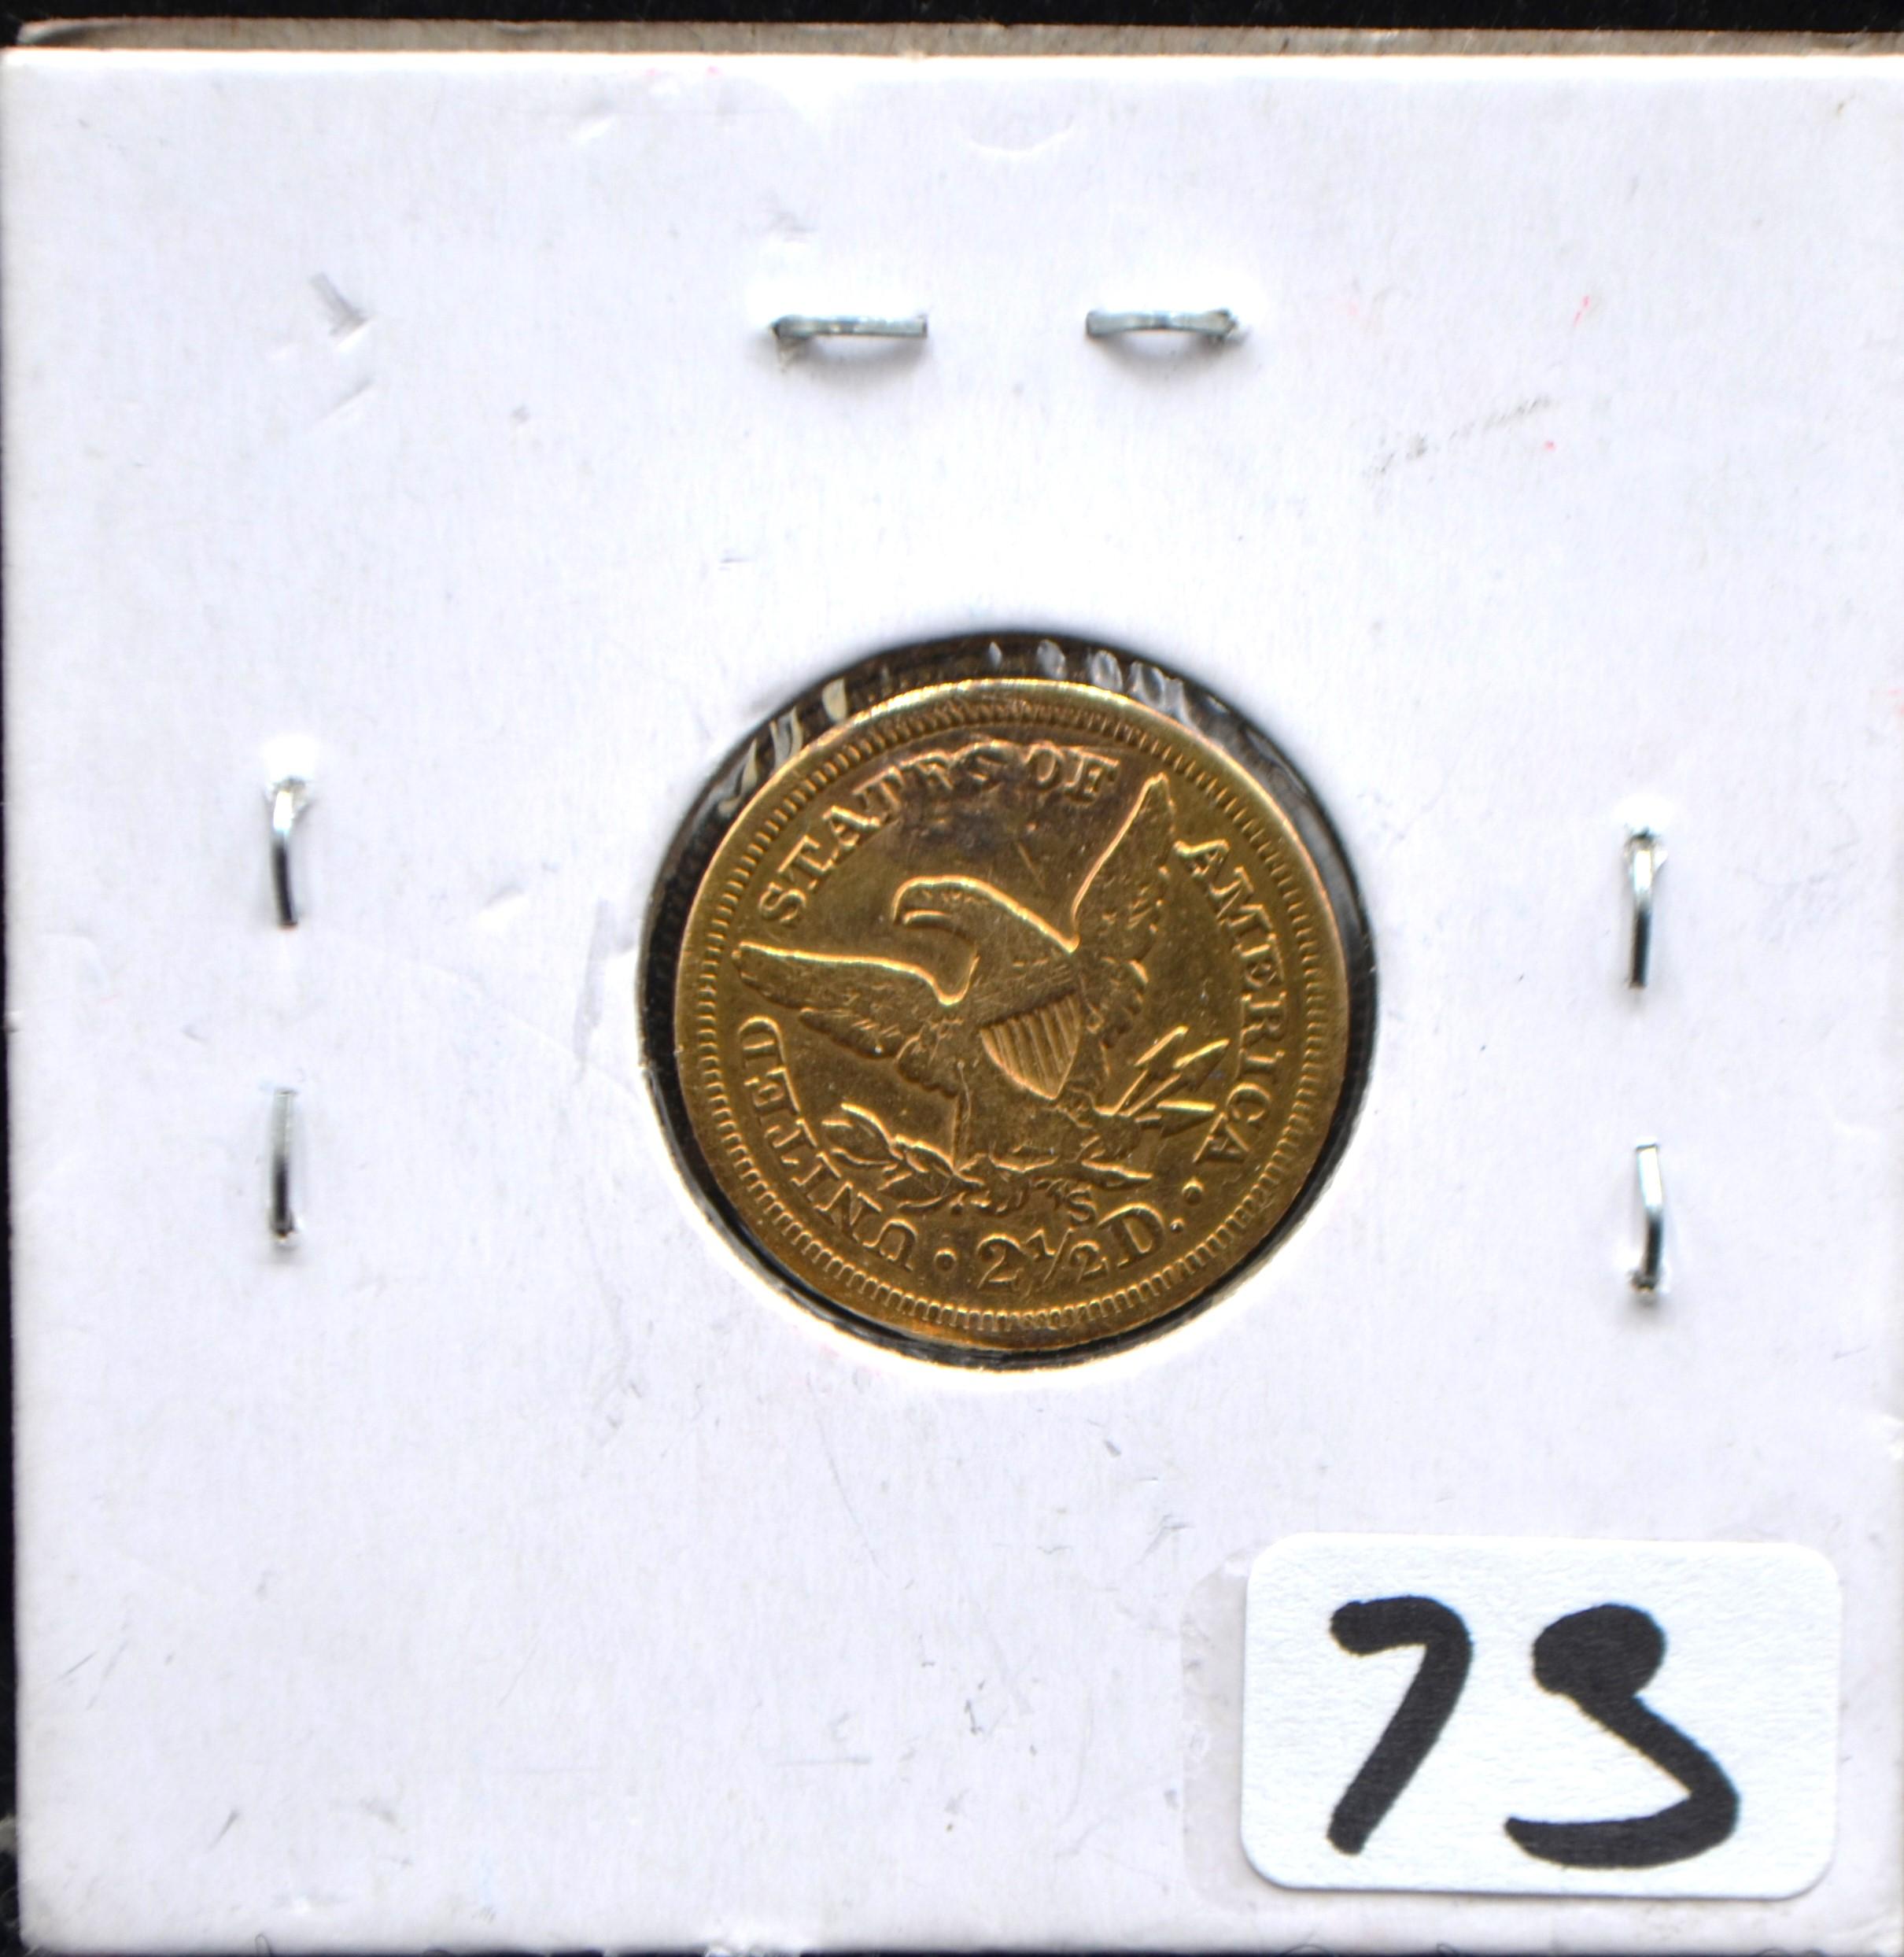 1861-S $2 1/2 LIBERTY HEAD GOLD COIN